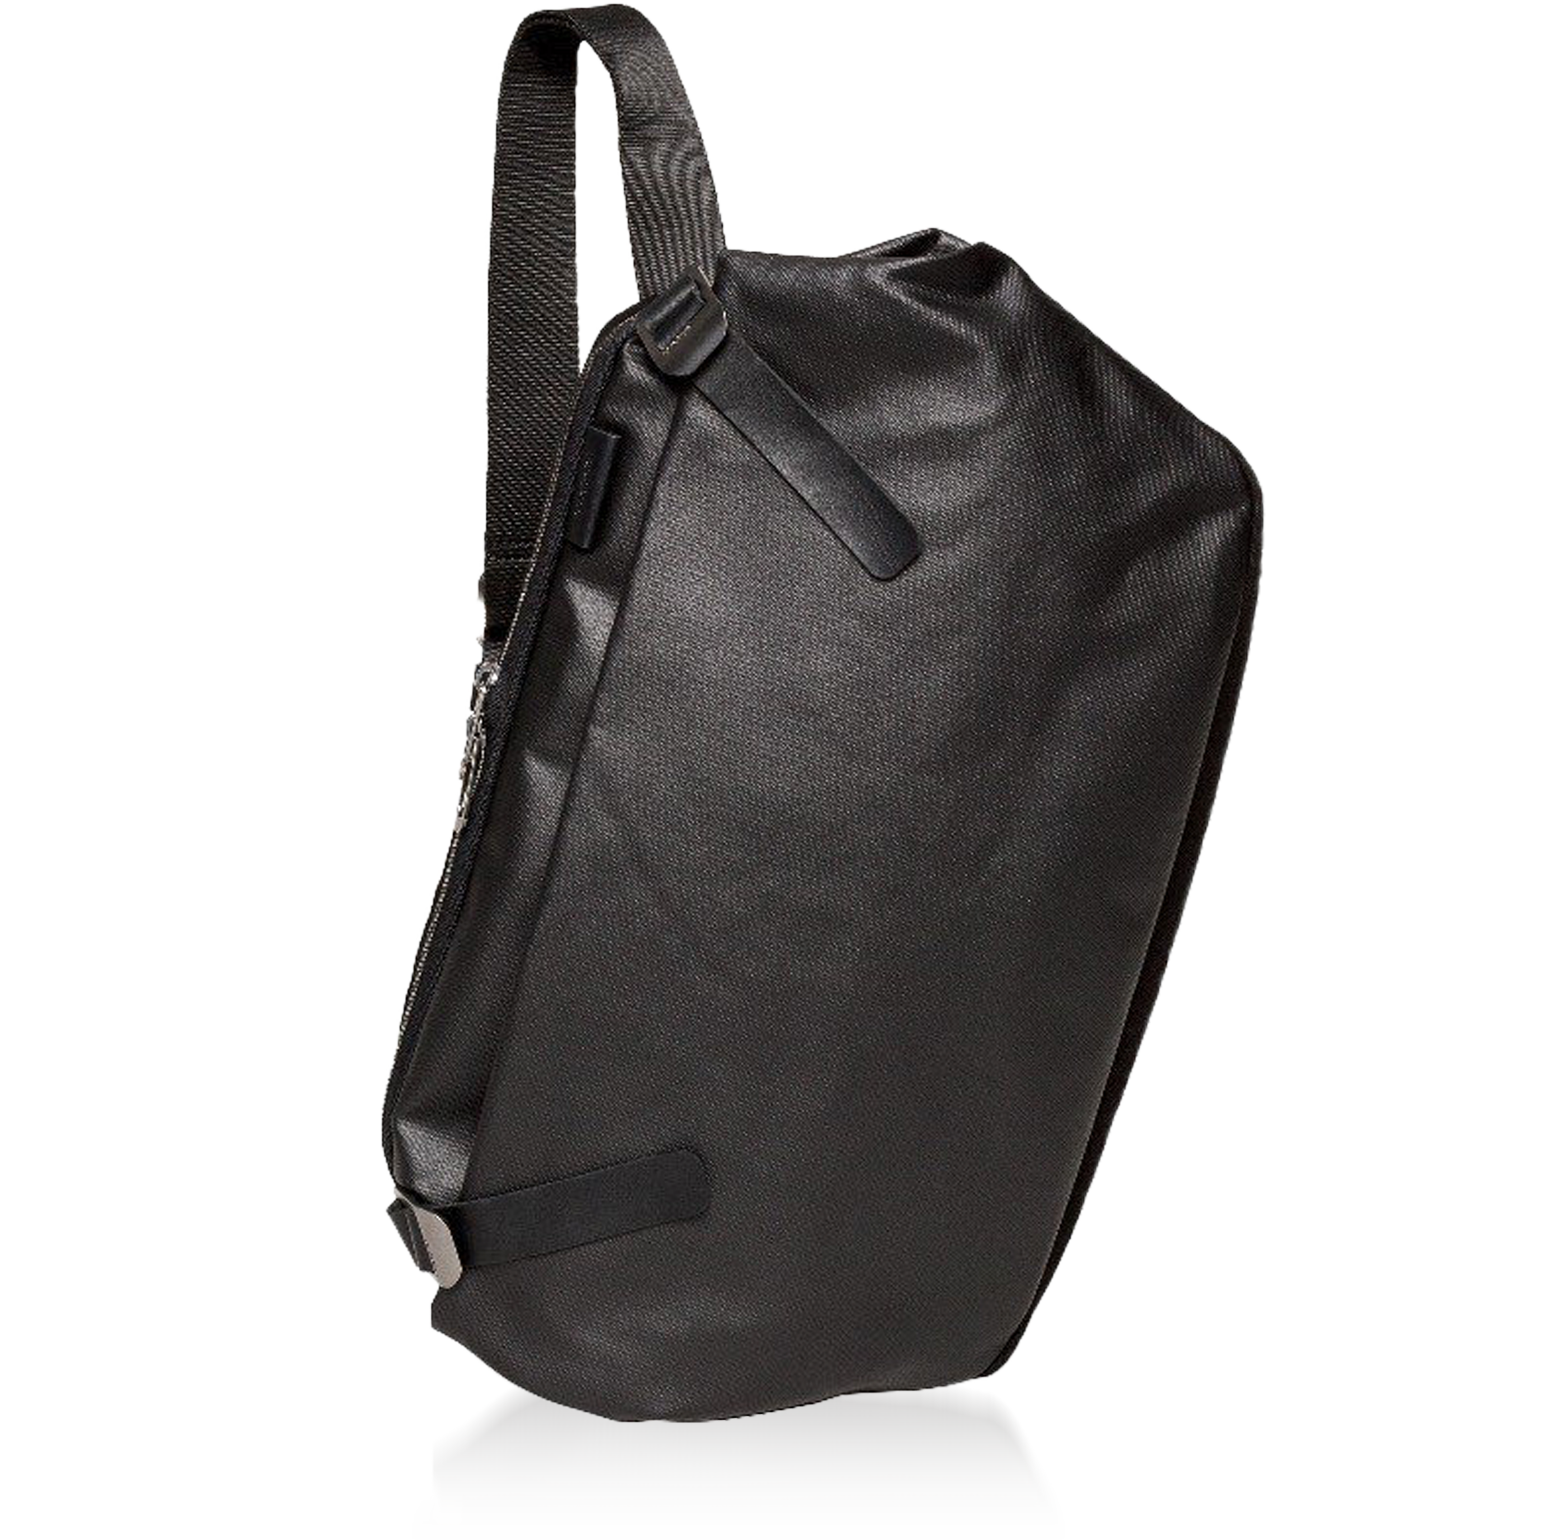 Côte&Ciel Black Riss Coated Canvas One Shoulder Backpack at FORZIERI